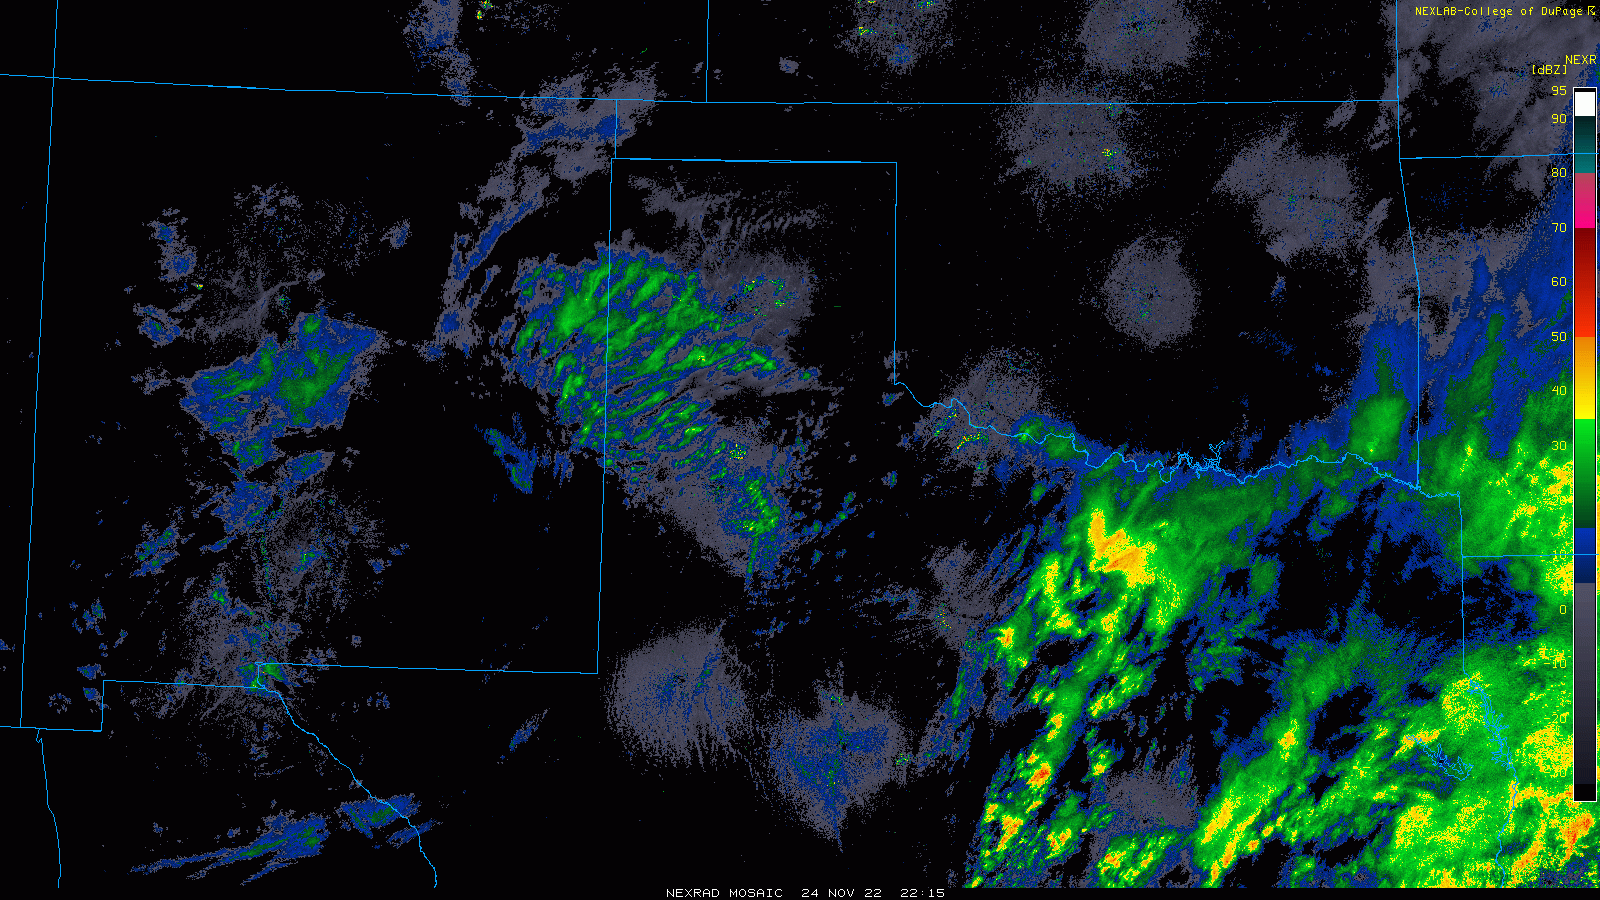 Regional radar loop valid from 4:15 pm on 24 November to 7:35 am on the 25th.